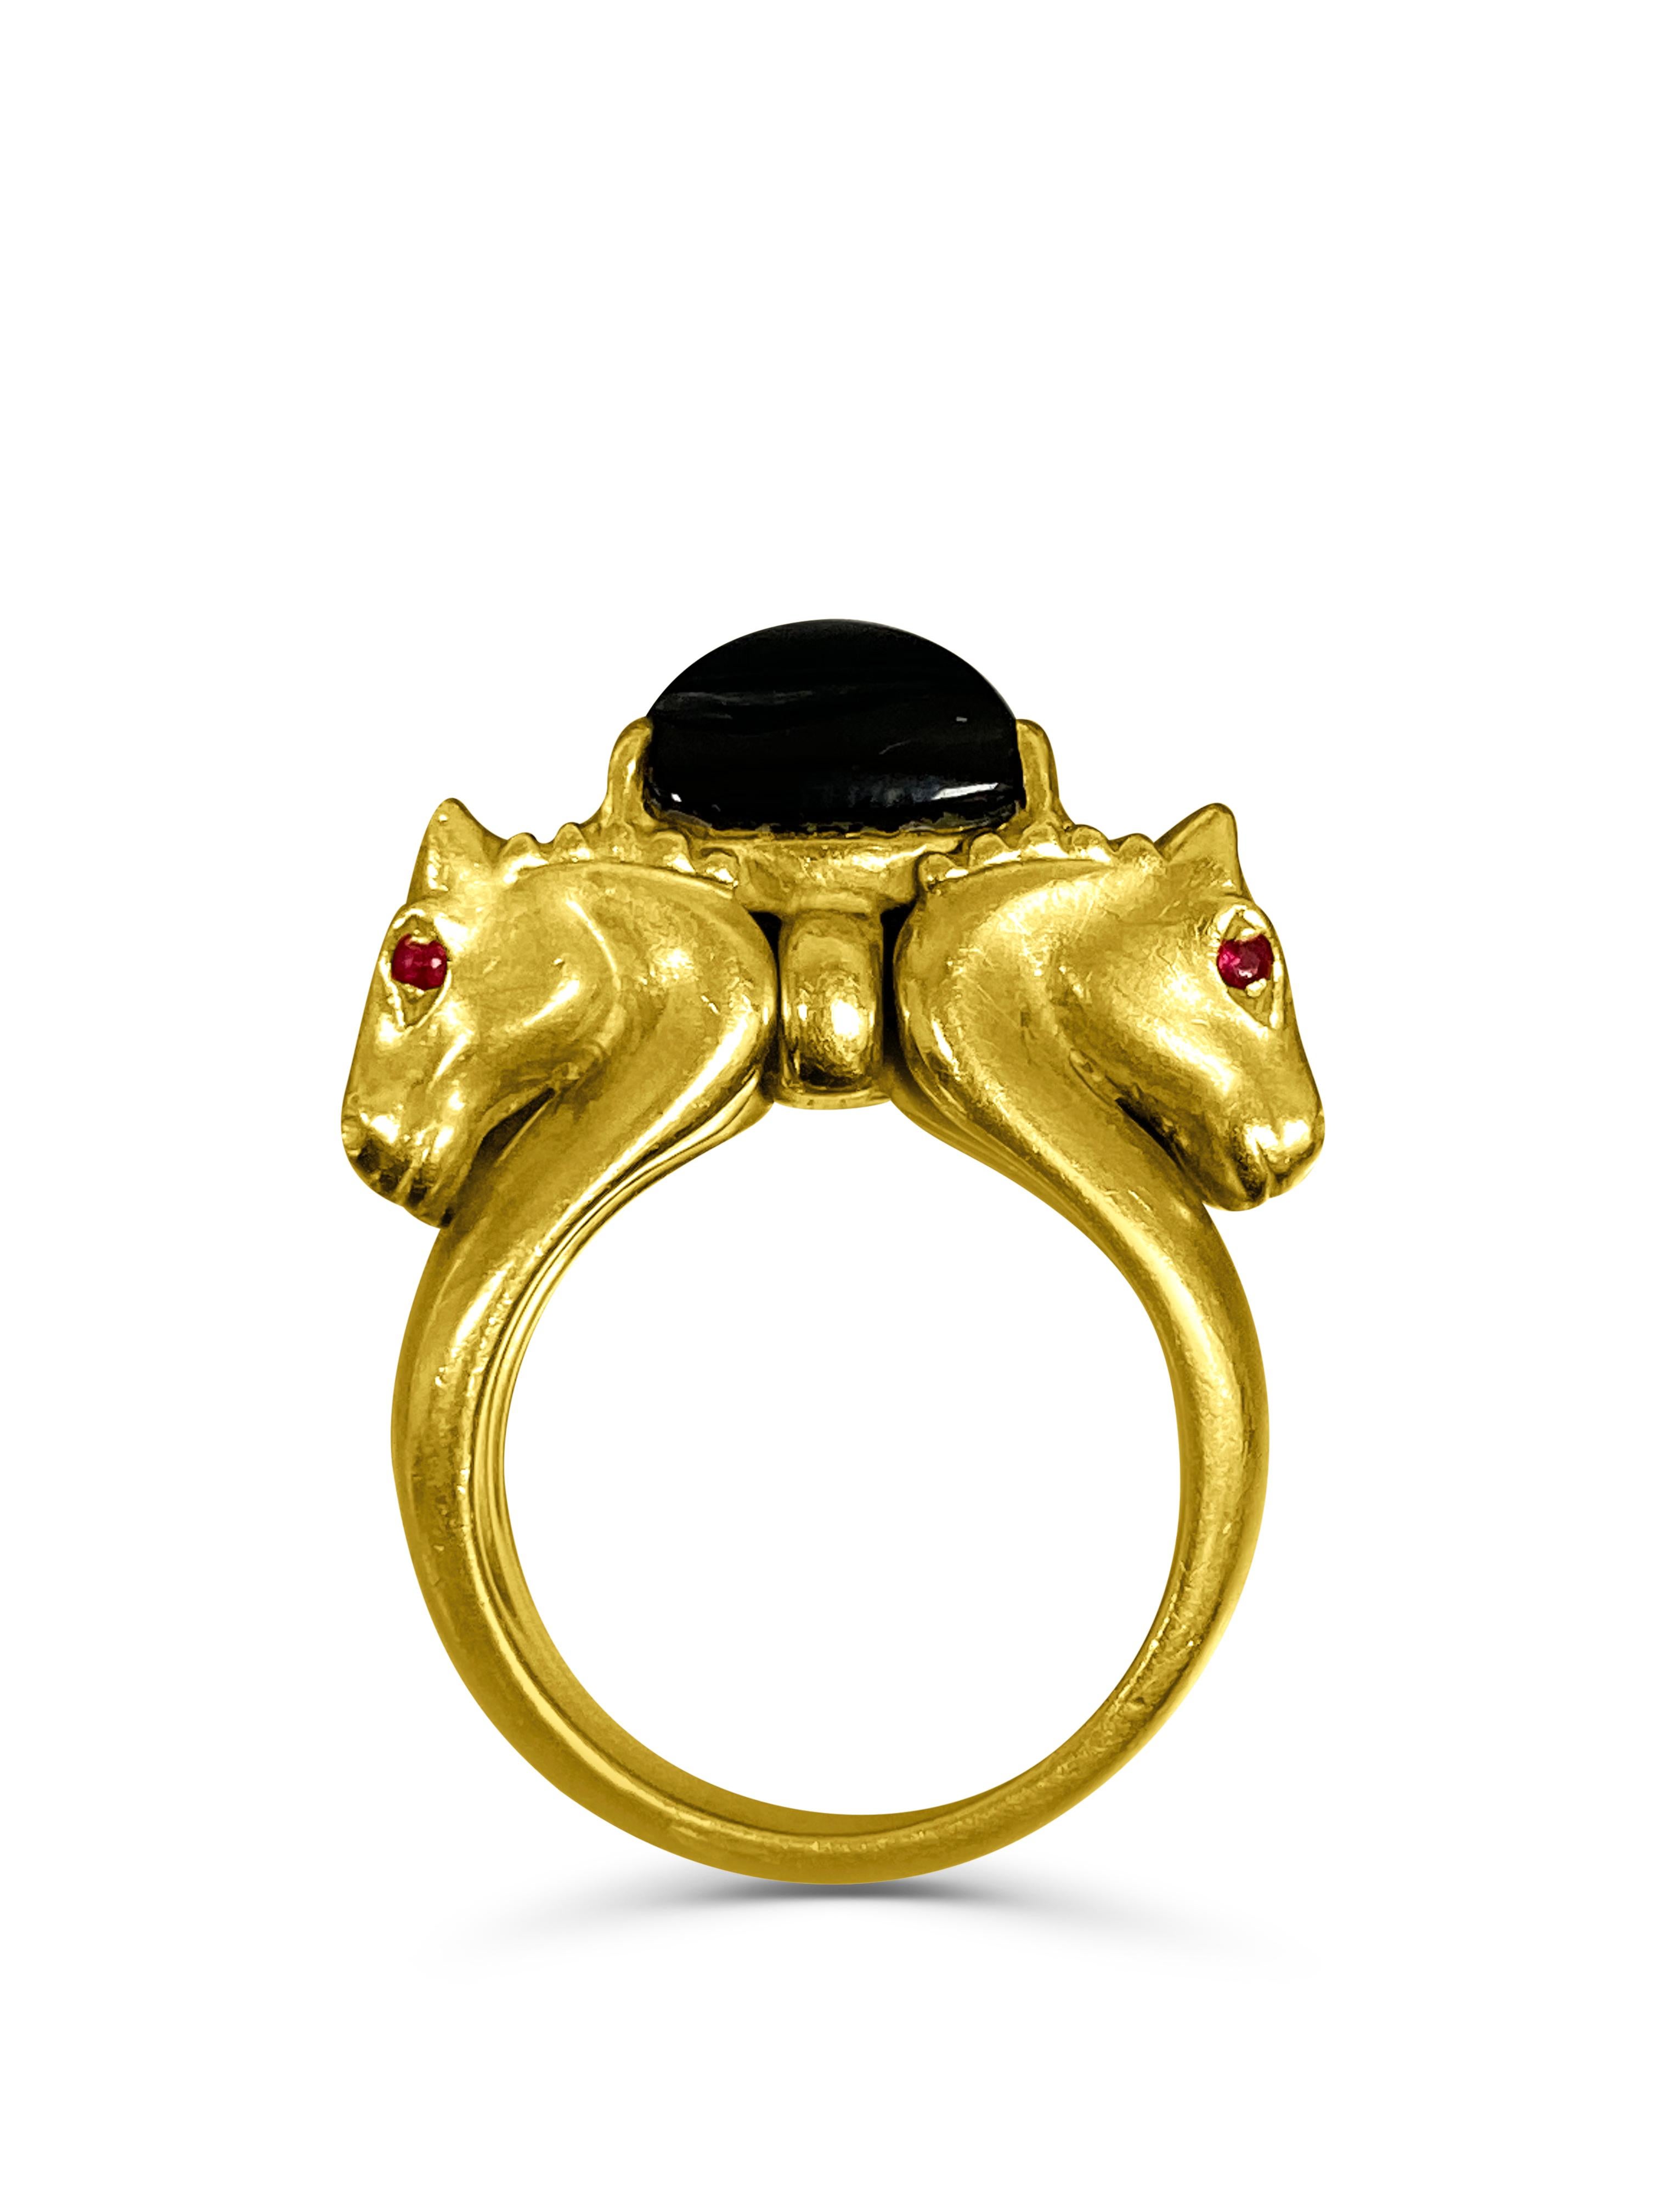 18 karat yellow gold horse ring, centering a trillion cut black Onyx (6.55 carats). Each horse eye is set with natural rubies, totaling 8 rubies. 

✔ Natural Black Onyx and Ruby's
✔ Gold Karat: 18K 
✔ Gemstone: Black Onyx 
✔ Onyx Shape: Trillion
✔ 8